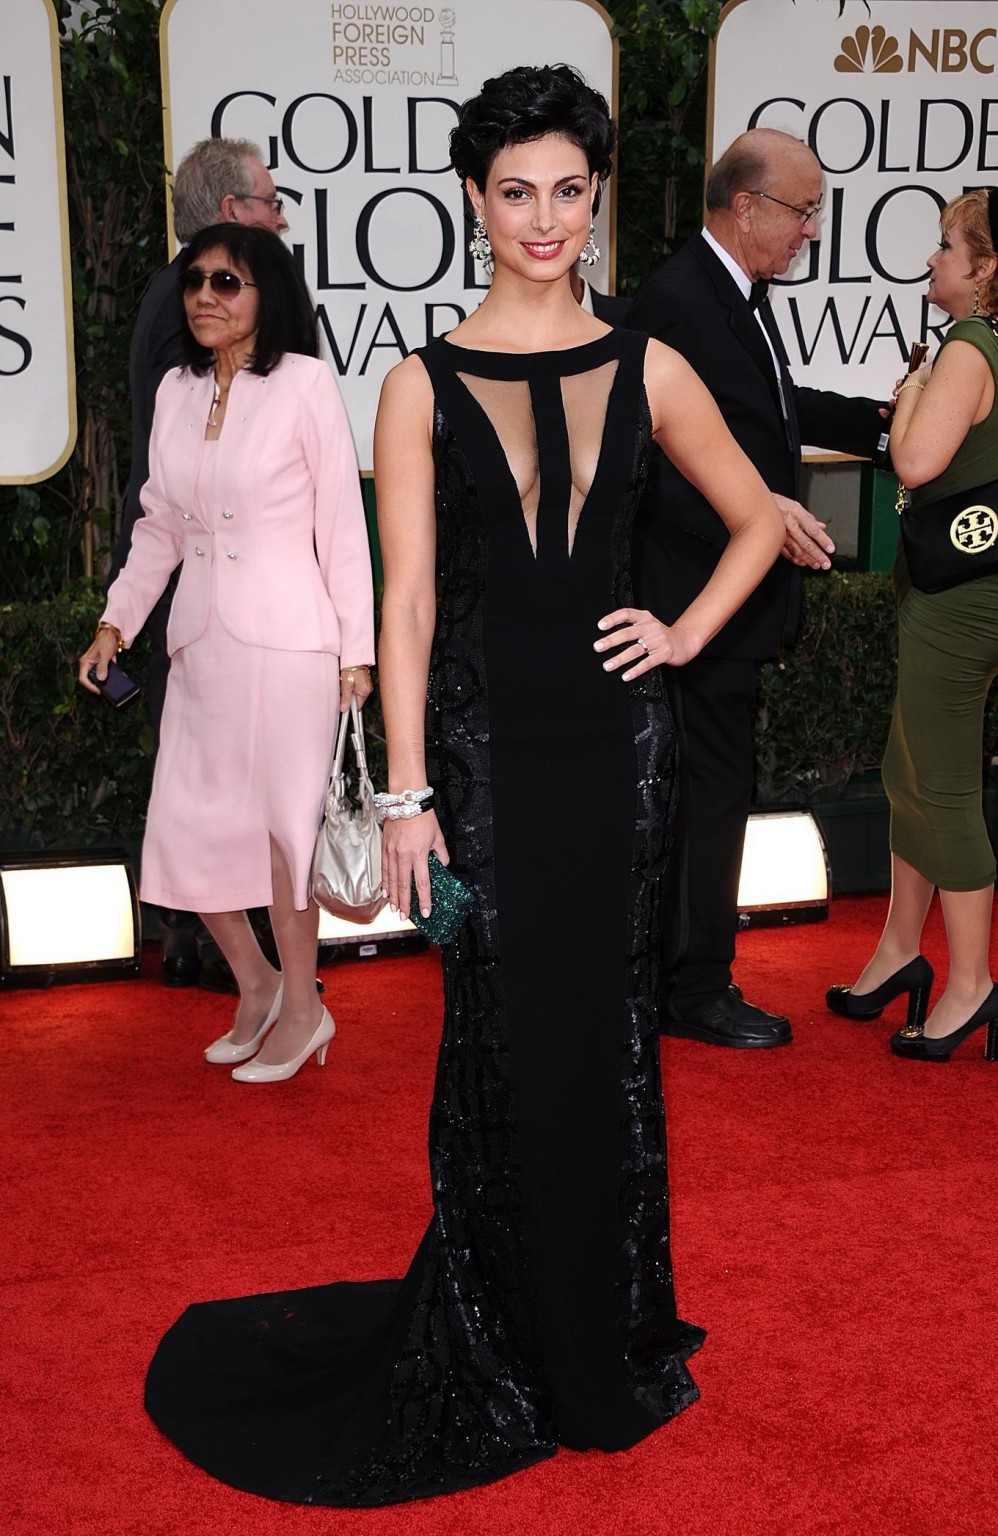 Morena Baccarin braless wearing sexy black dress at the Golden Globes 2012 #75276516